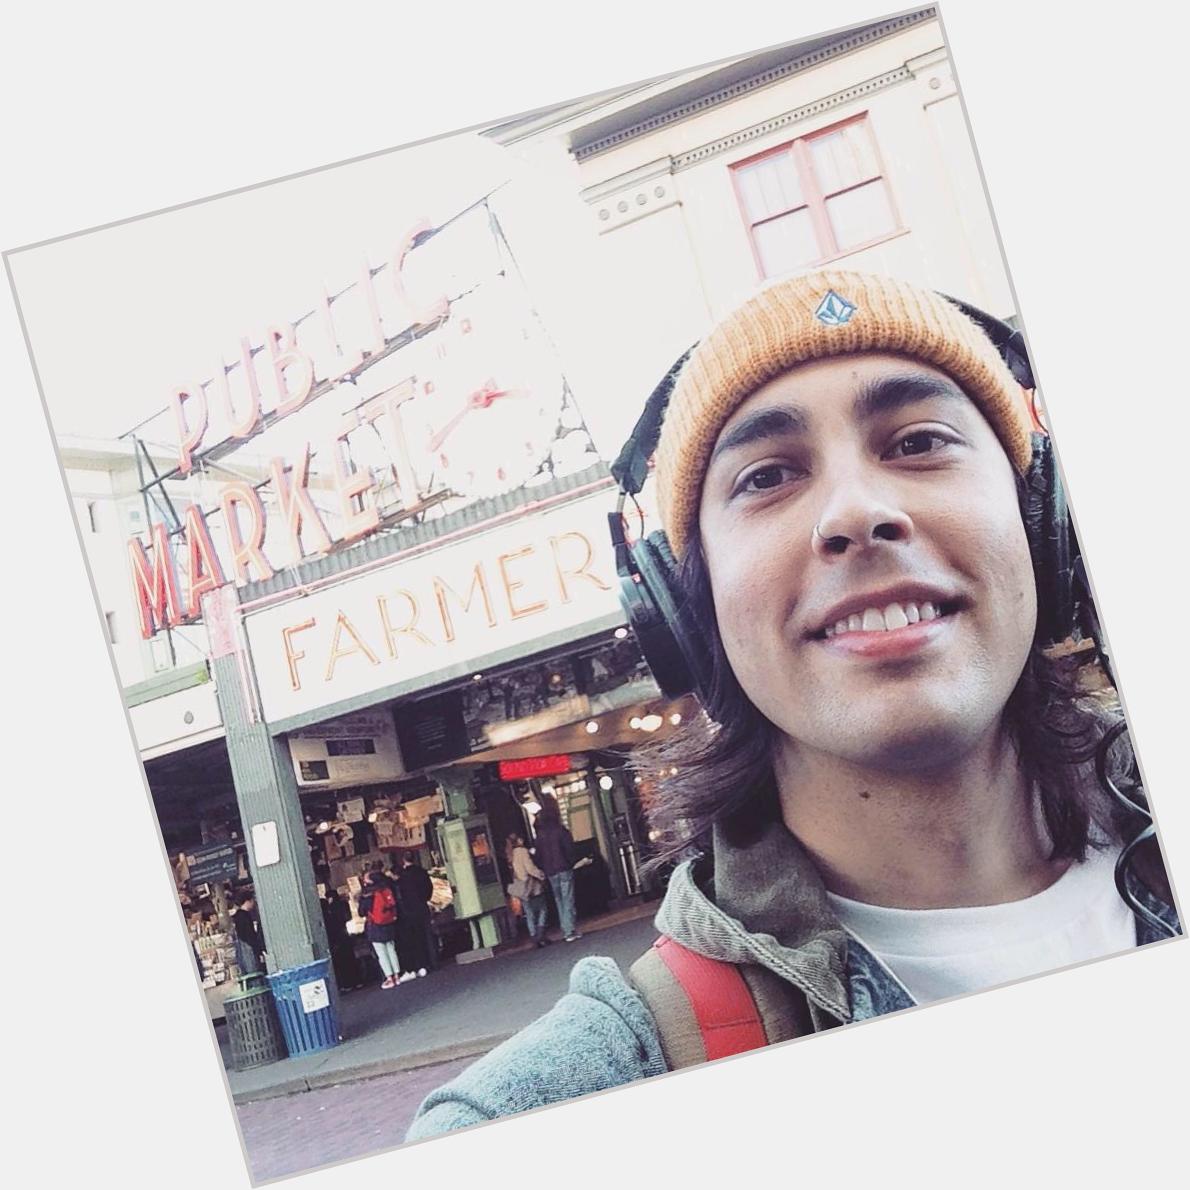 Fucking happy birthday vic fuentes you mexican piece of crap how dare you age 